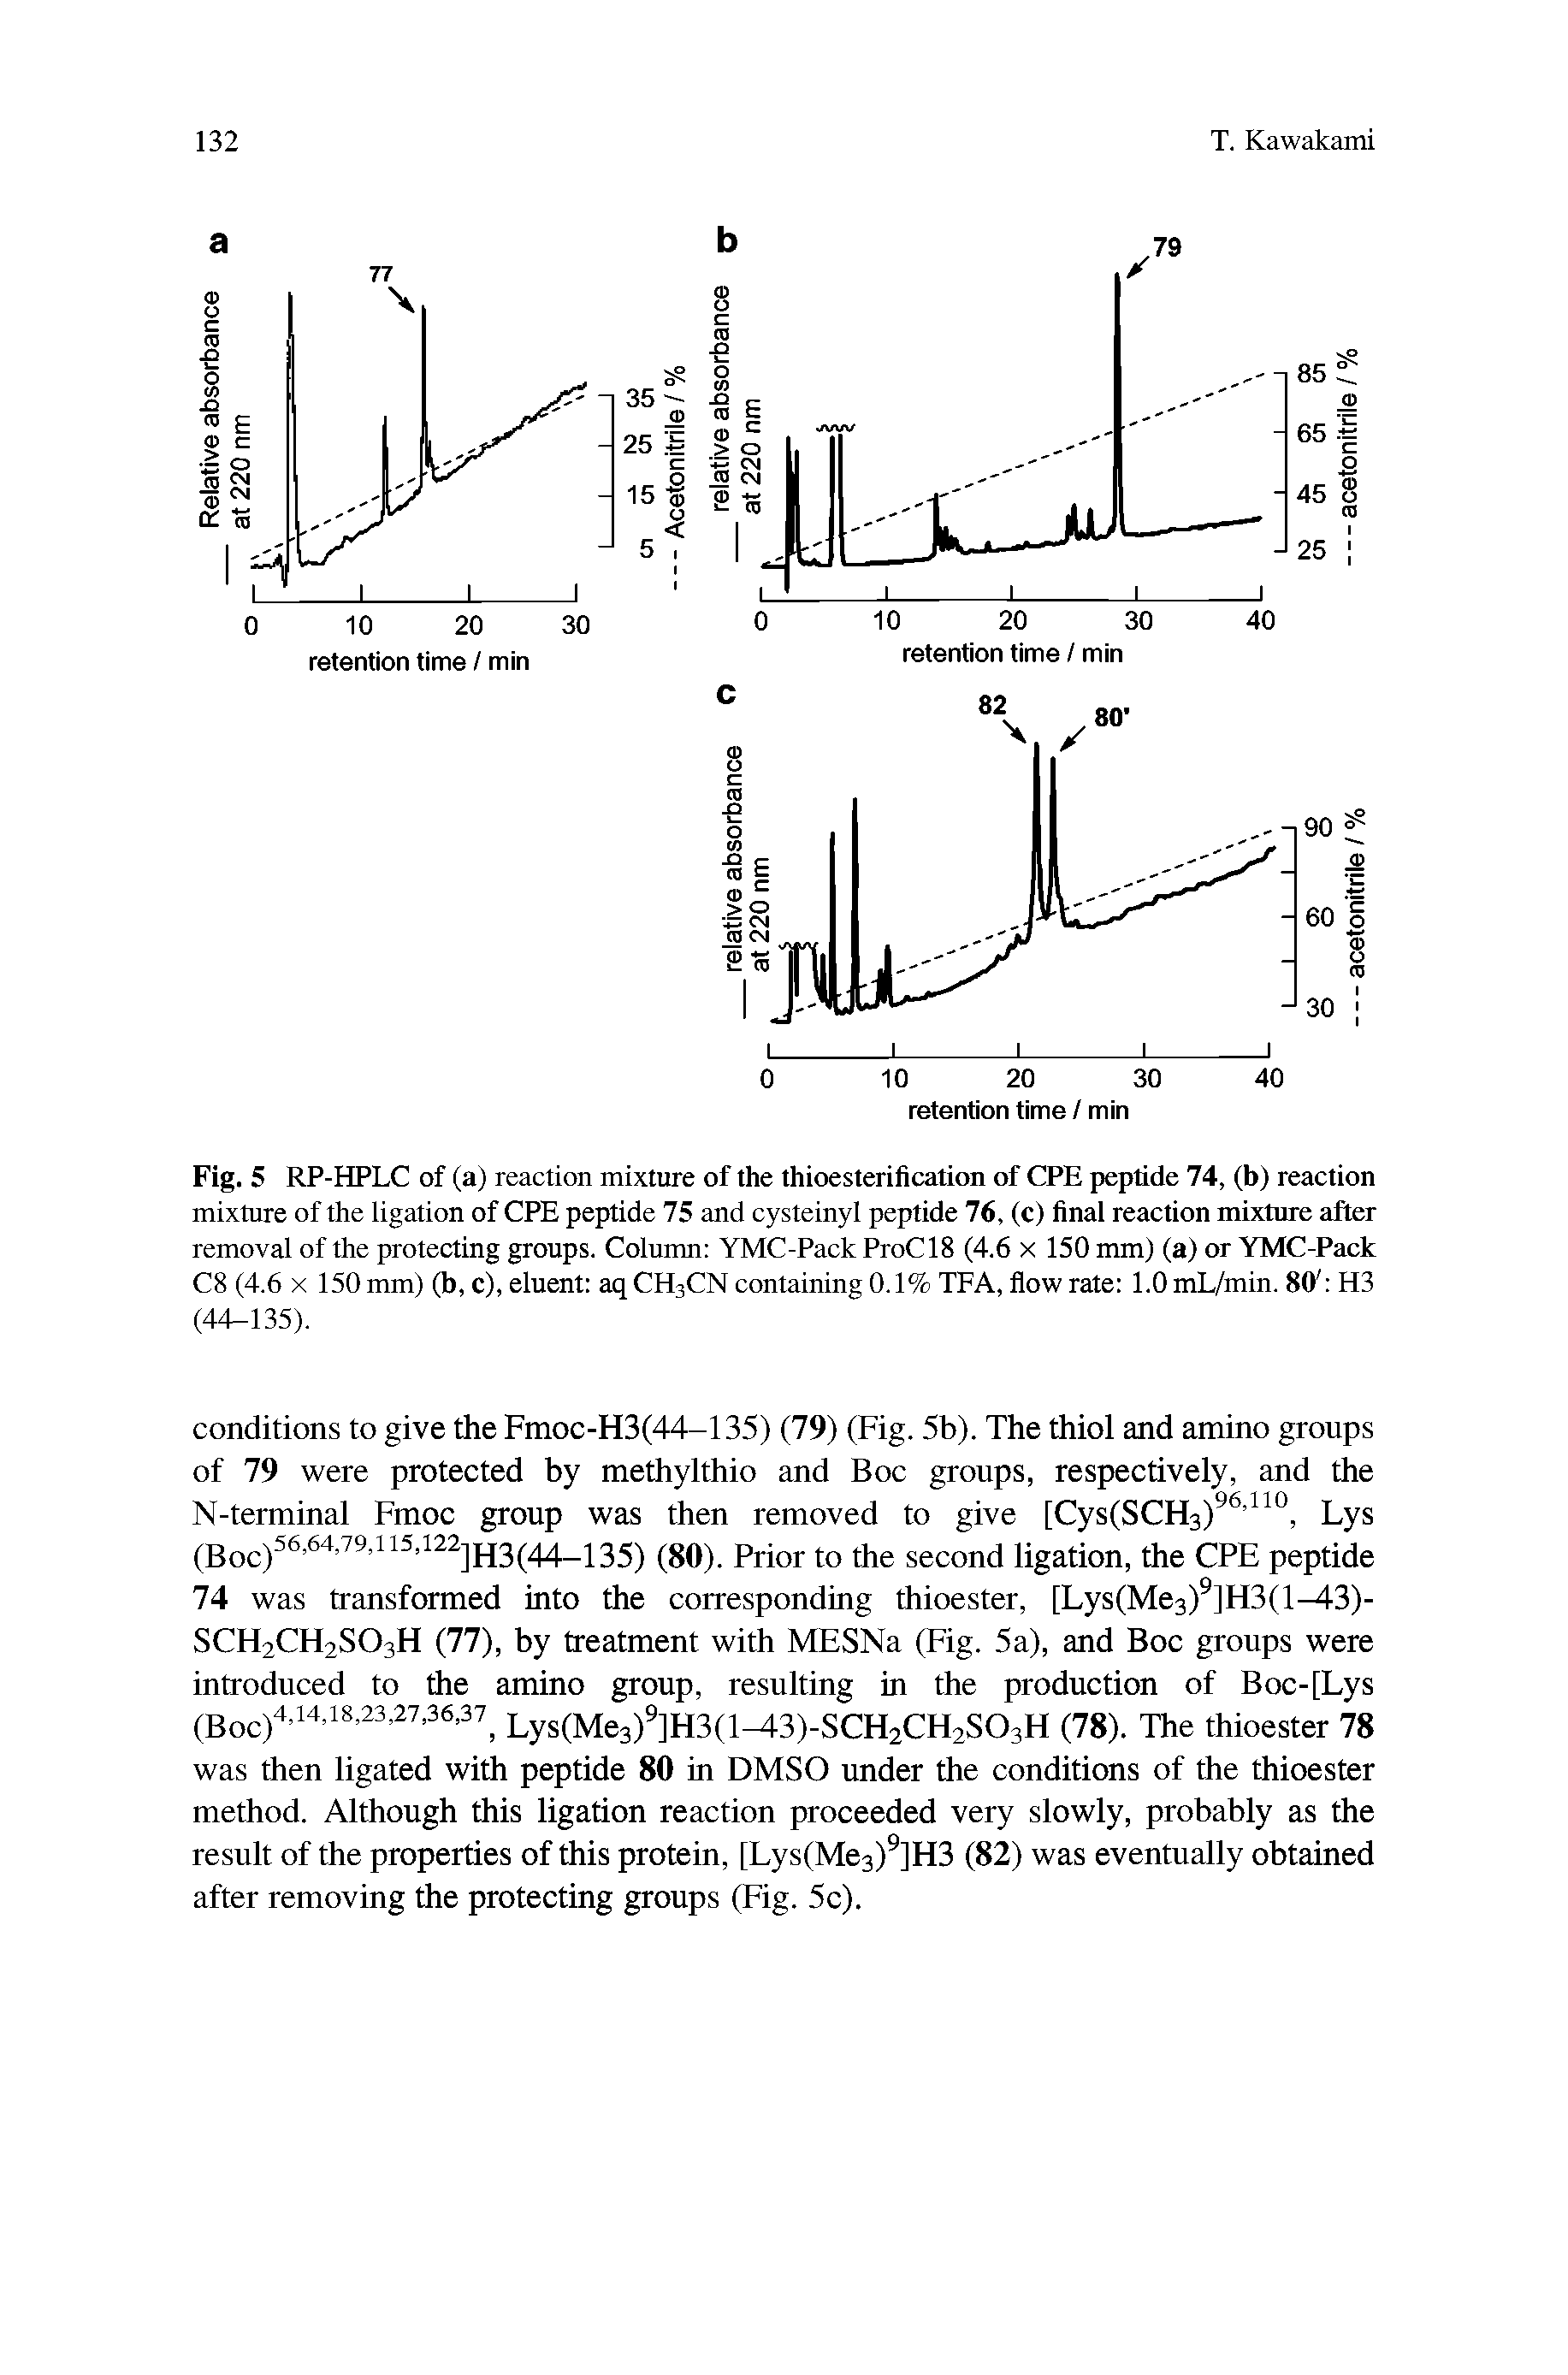 Fig. 5 RP-HPLC of (a) reaction mixture of the thioesterification of CPE peptide 74, (b) reaction mixture of the ligation of CPE peptide 75 and cysteinyl peptide 76, (c) final reaction mixture after removal of the protecting groups. Column YMC-Pack ProClS (4.6 x 150 mm) (a) or YMC-Pack C8 (4.6 X 150 mm) (b, c), eluent aq CH3CN containing 0.1% TEA, flow rate 1.0 mL/min. 80 H3 (44-135).